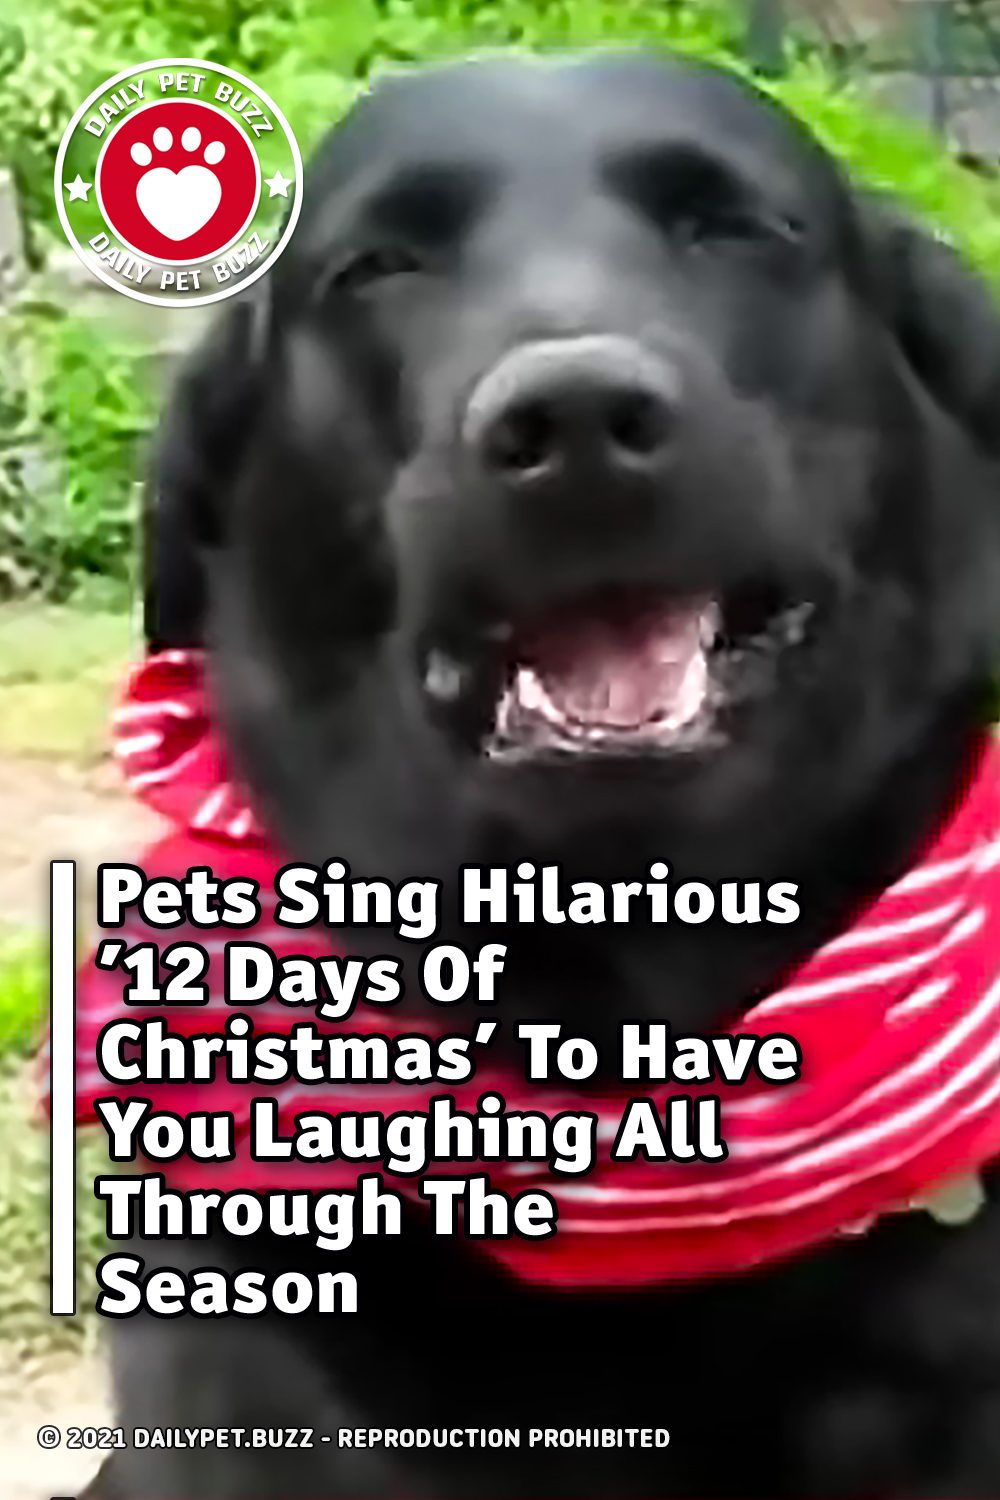 Pets Sing Hilarious \'12 Days Of Christmas\' To Have You Laughing All Through The Season